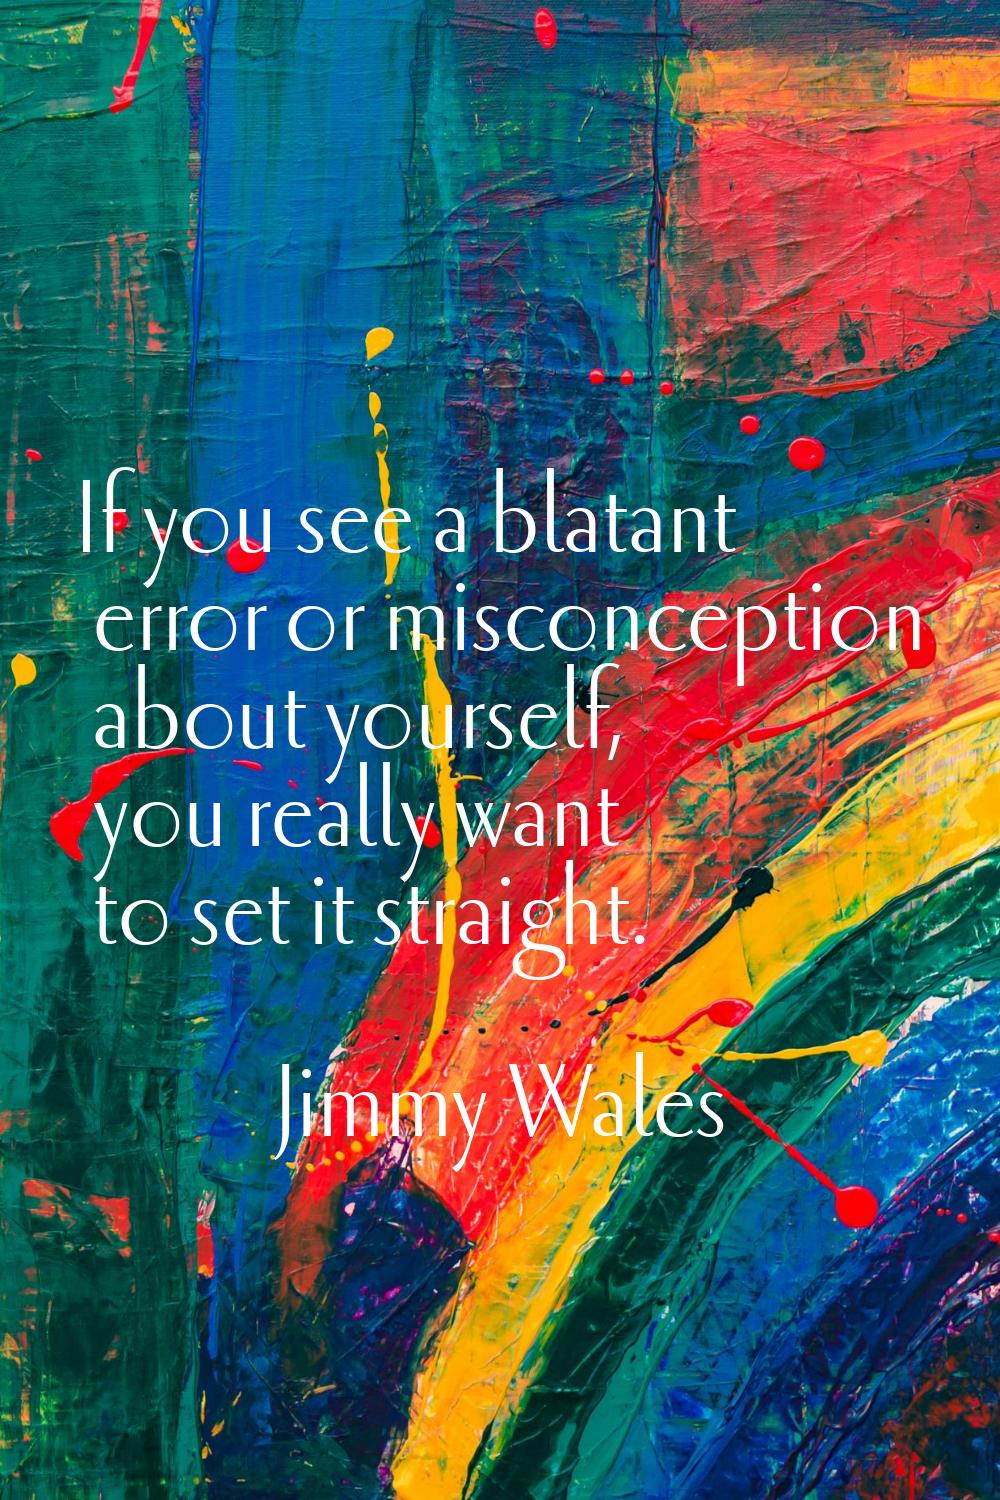 If you see a blatant error or misconception about yourself, you really want to set it straight.